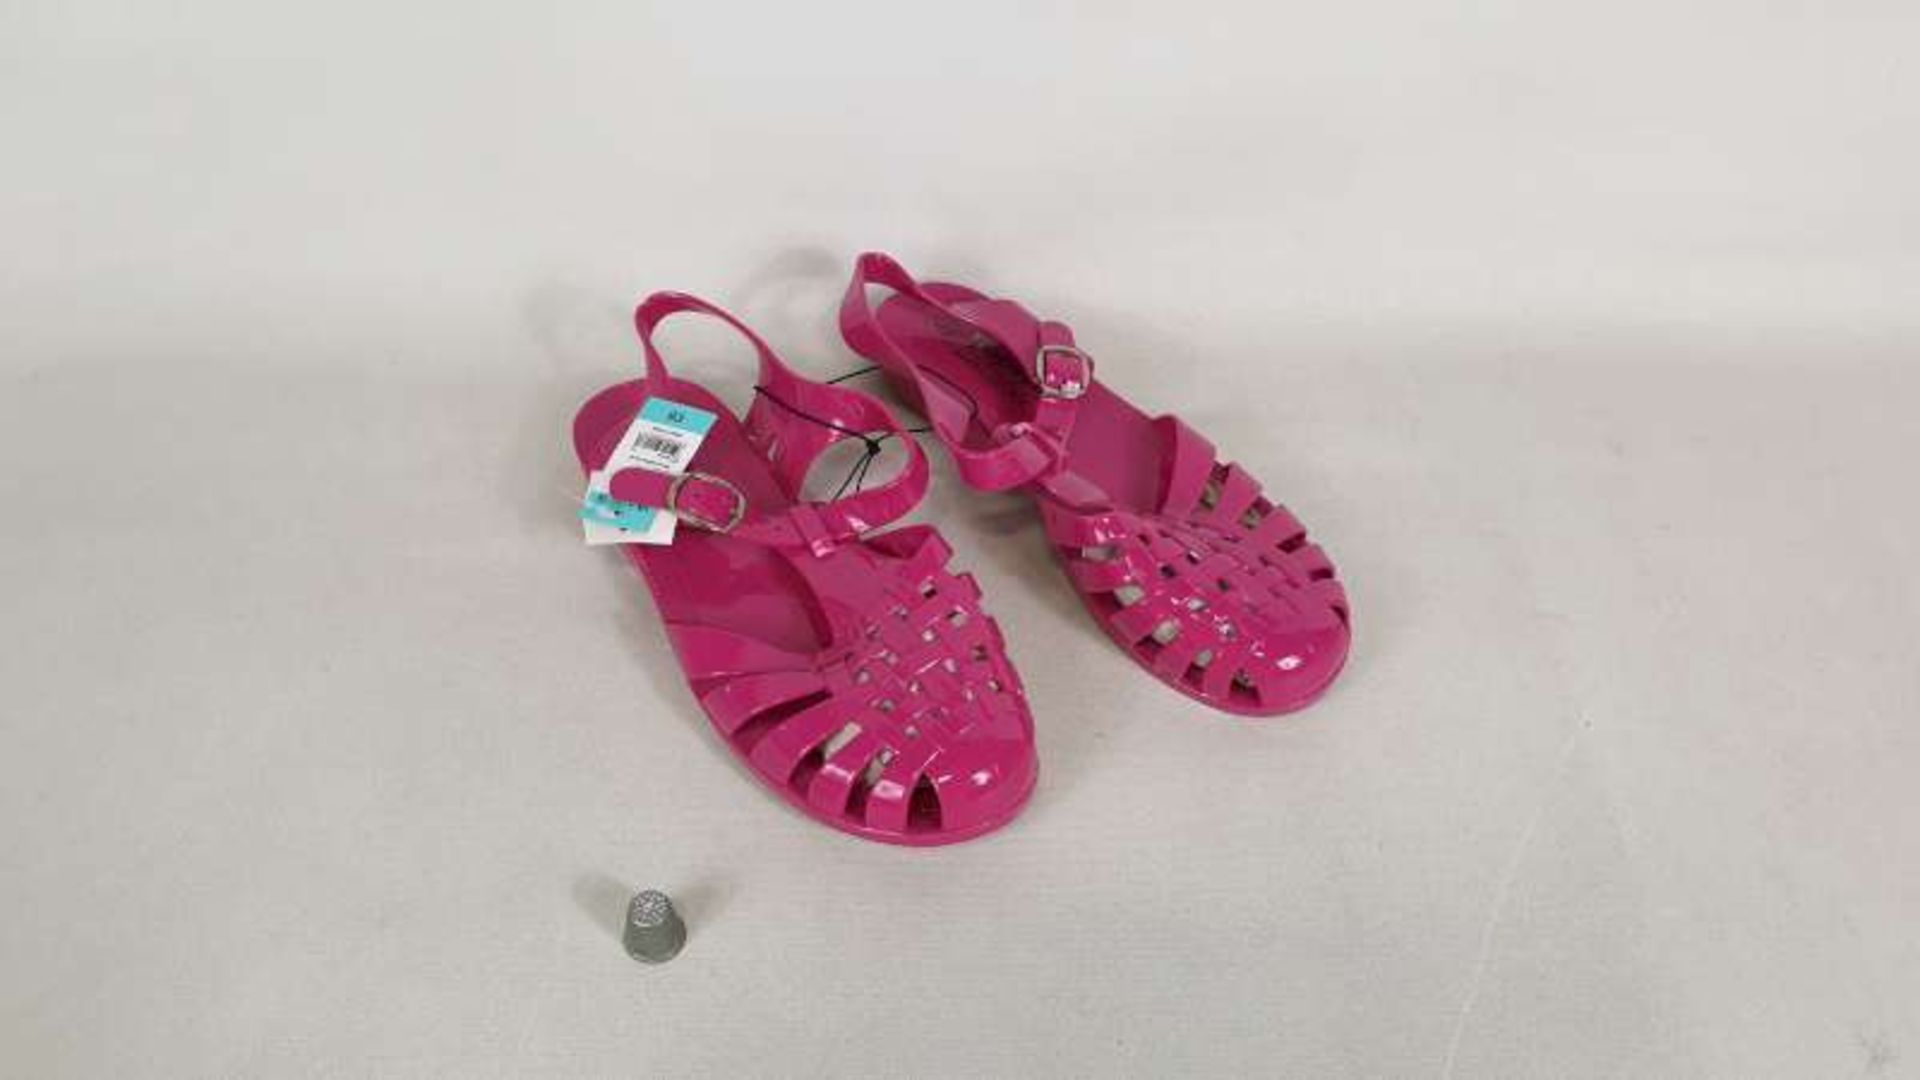 APPROX 80 X BRAND NEW PINK JELLY SANDALS IN 2 BOXES